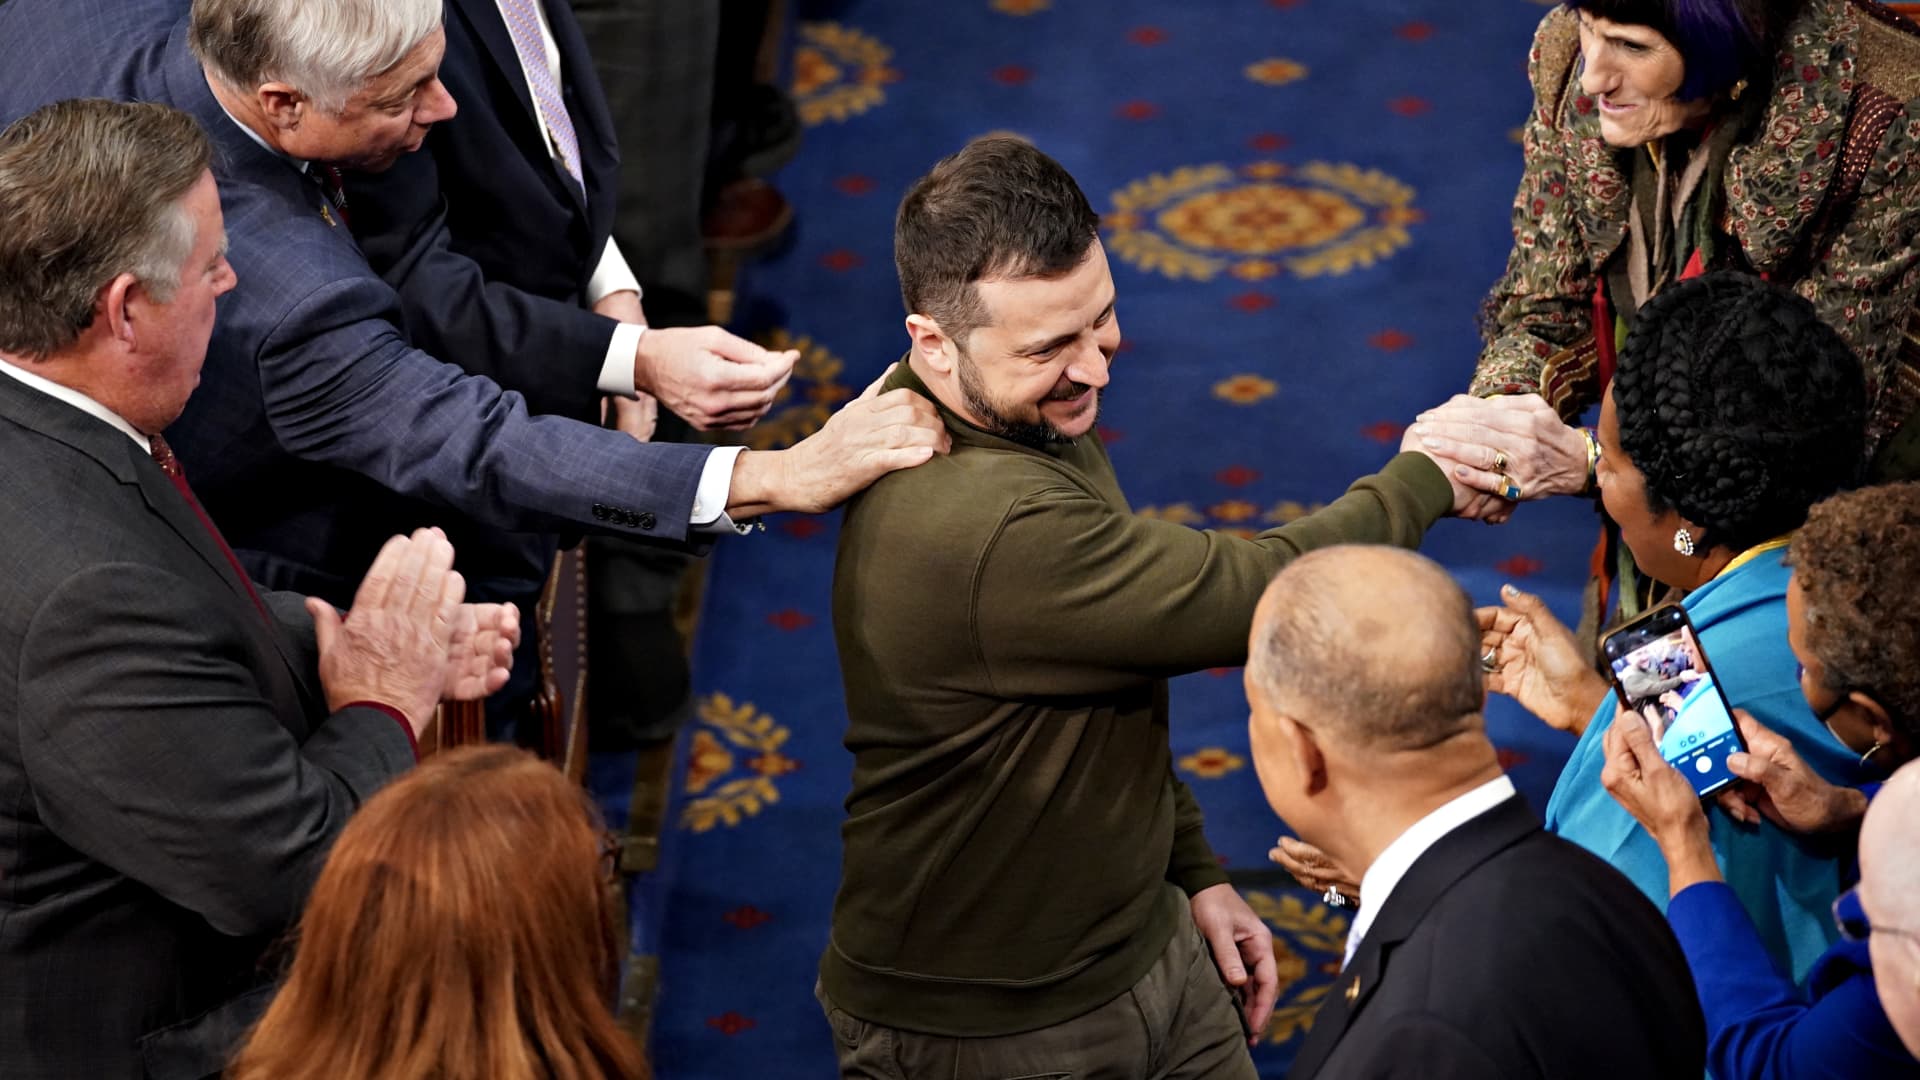 Volodymyr Zelenskyy, Ukraine's president, center, arrives to speak during a joint meeting of Congress at the US Capitol in Washington, DC, US, on Wednesday, Dec. 21, 2022.